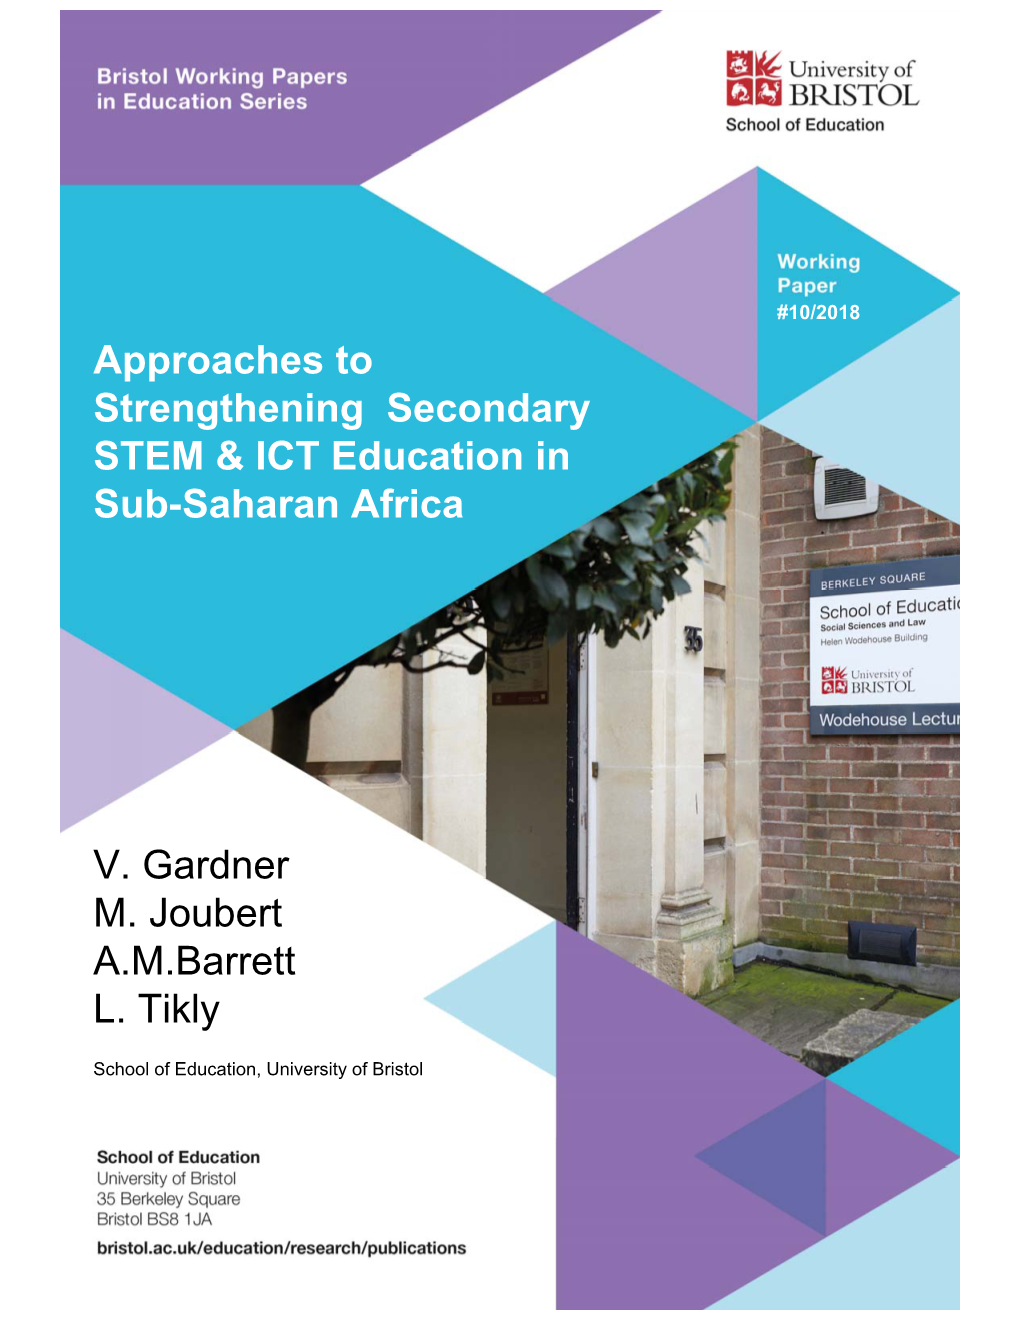 Approaches to Strengthening Secondary STEM & ICT Education in Sub-Saharan Africa